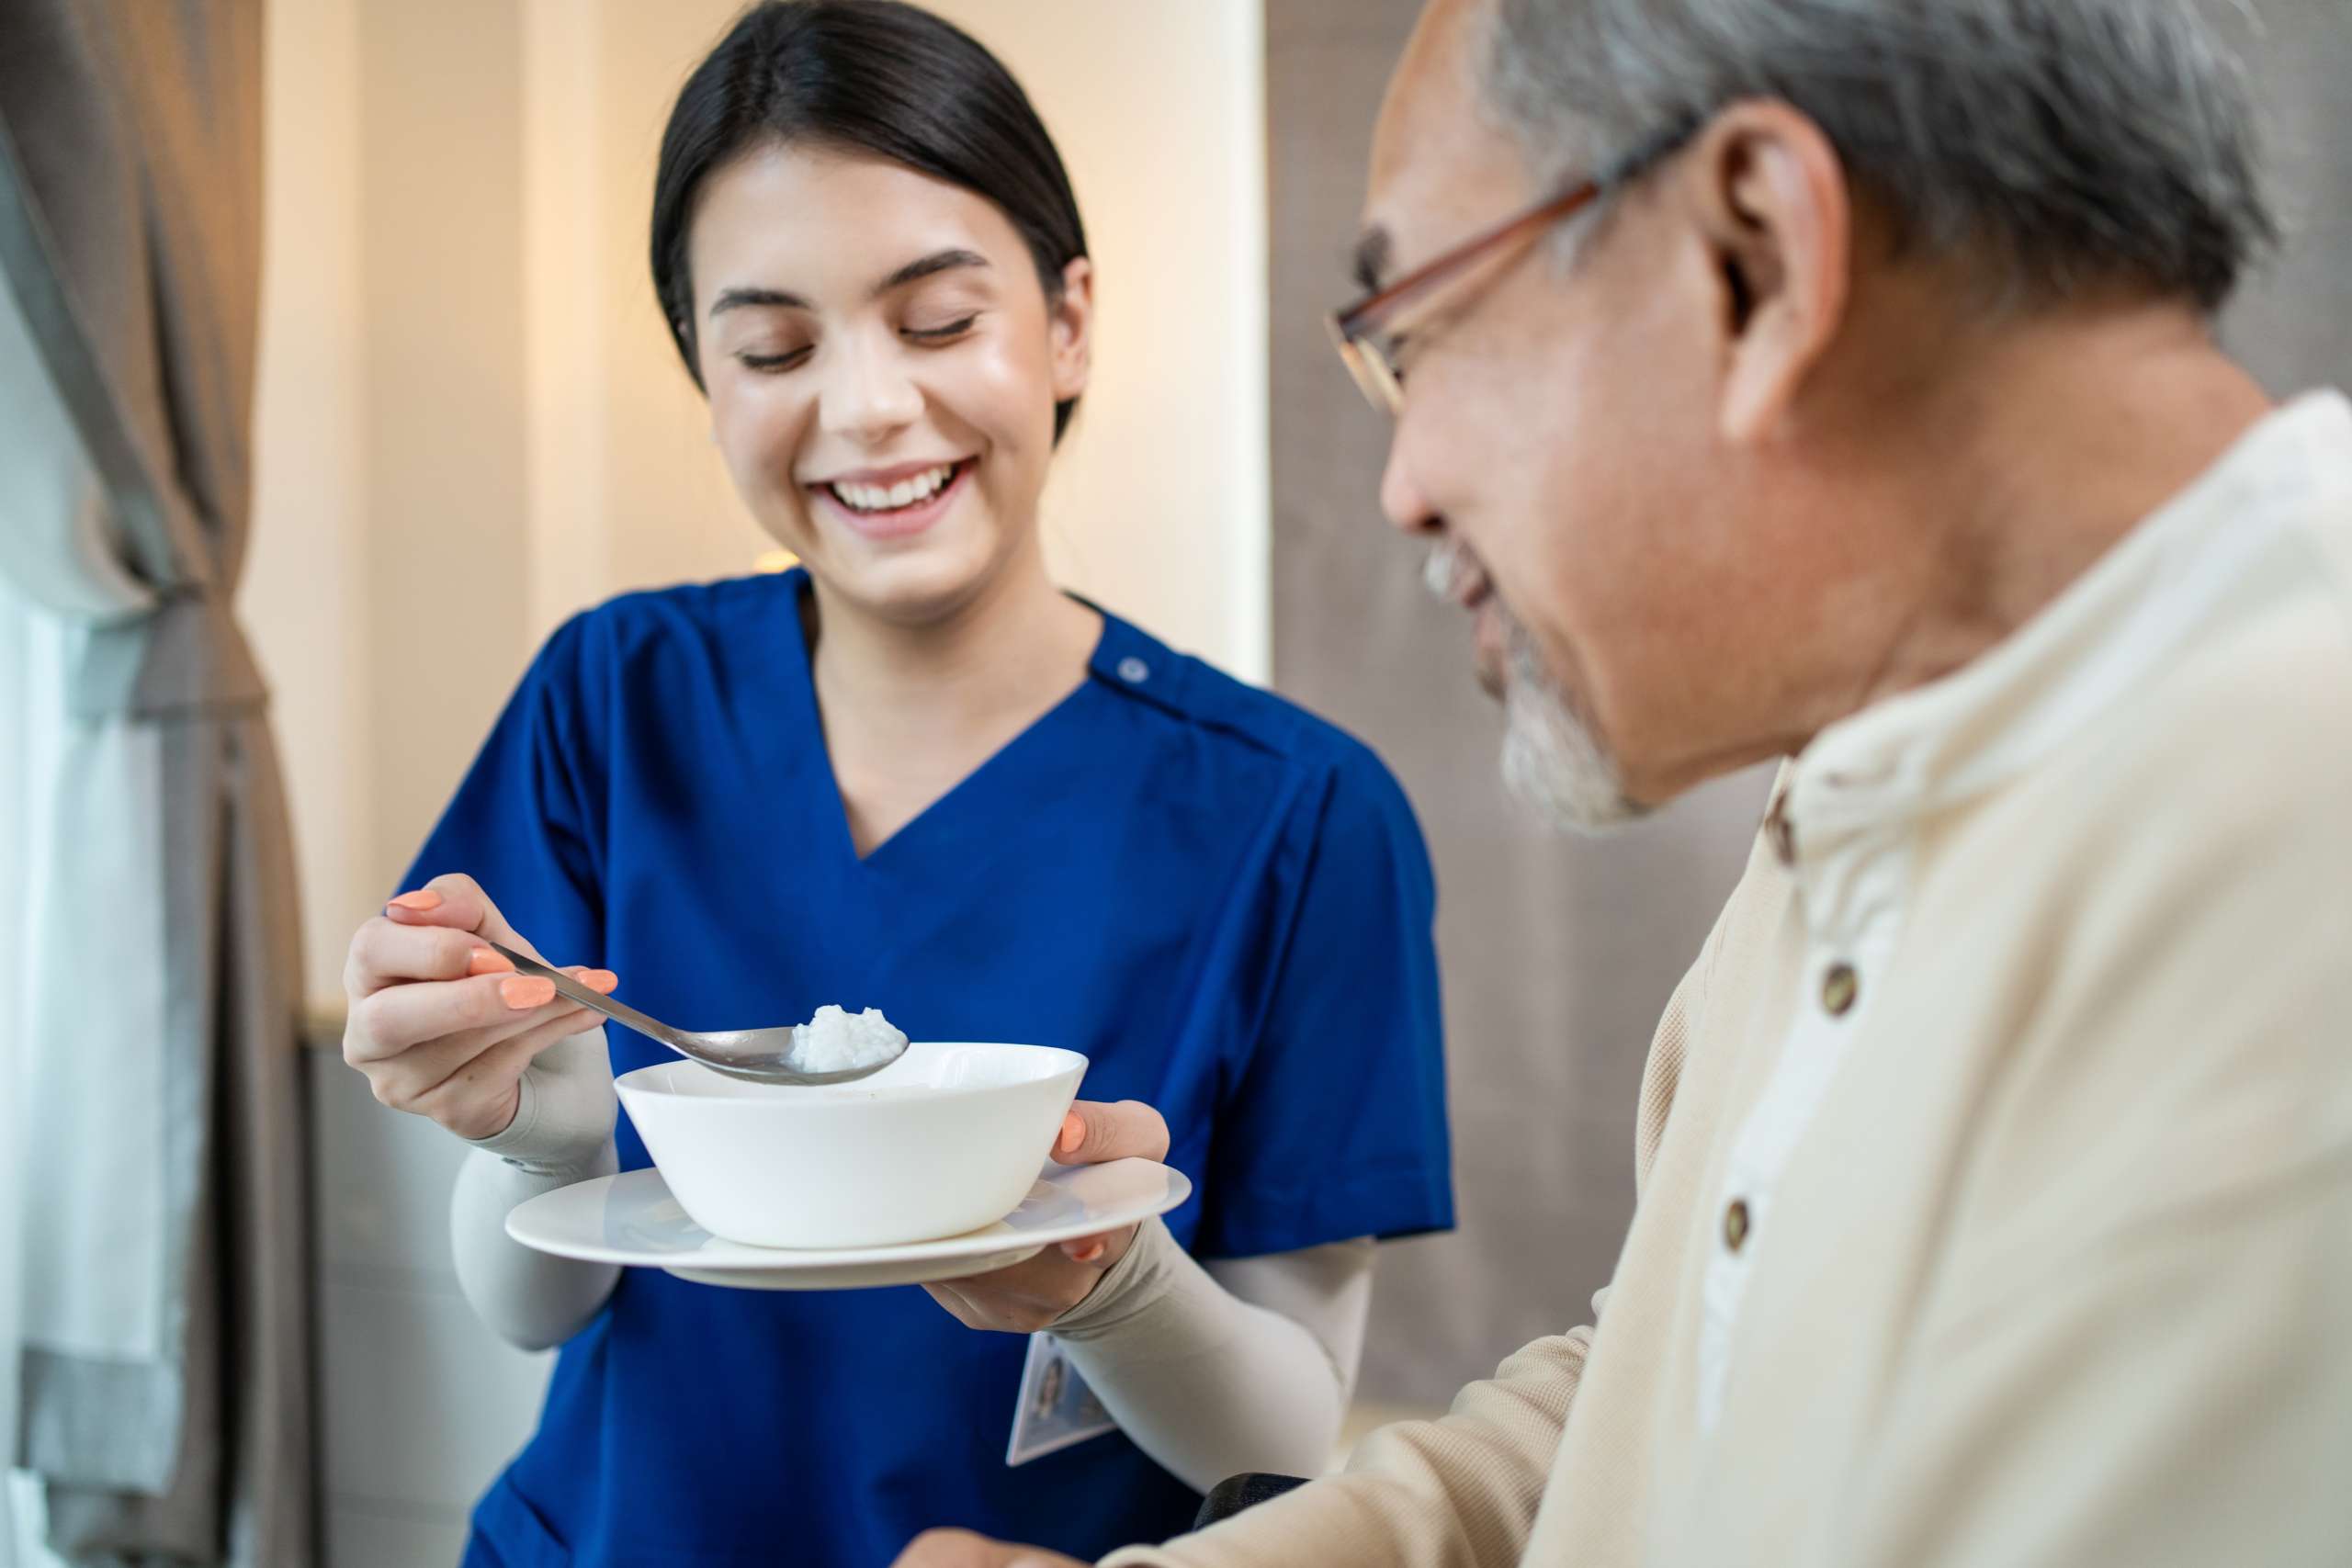 A health care worker serve food to senior patient